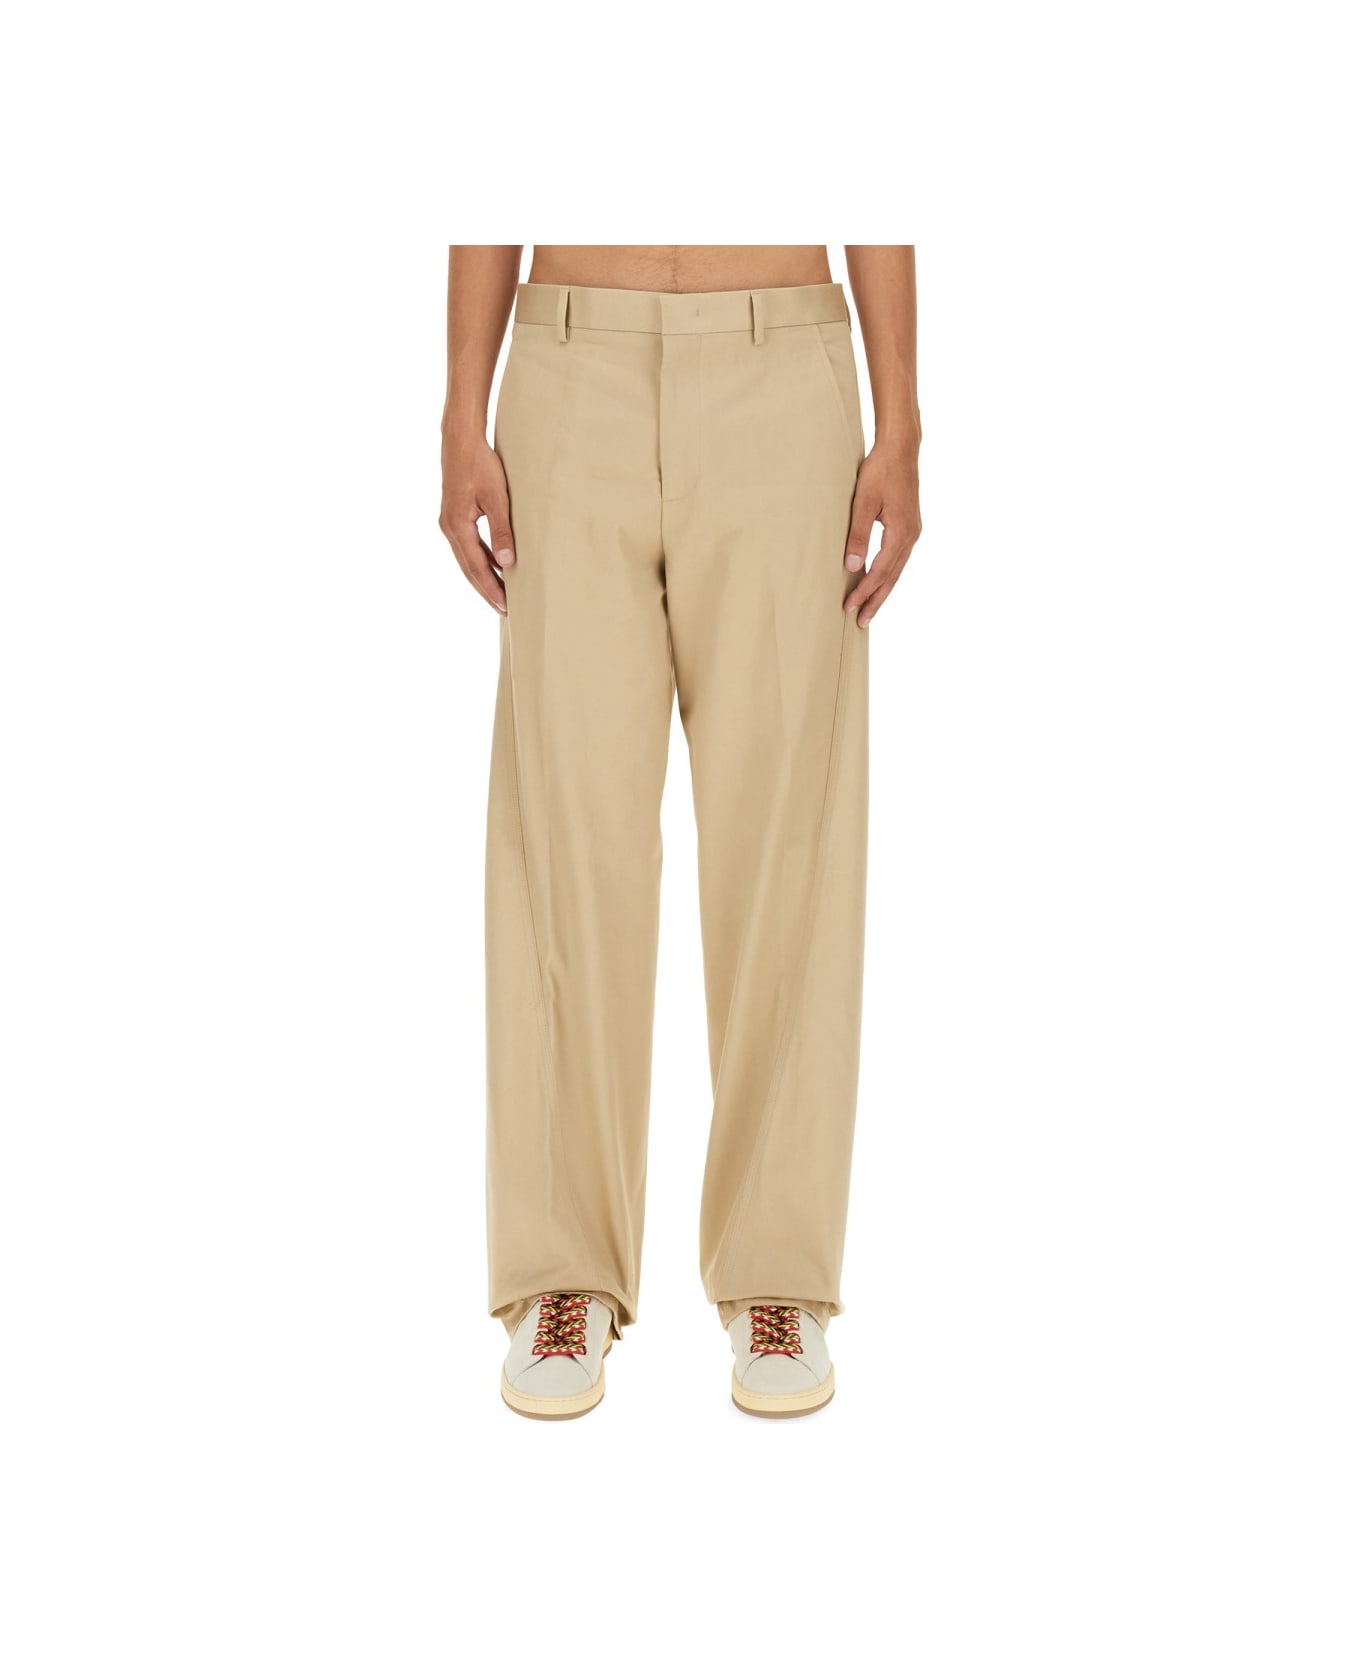 Lanvin Twisted Chino Pants - BEIGE ボトムス